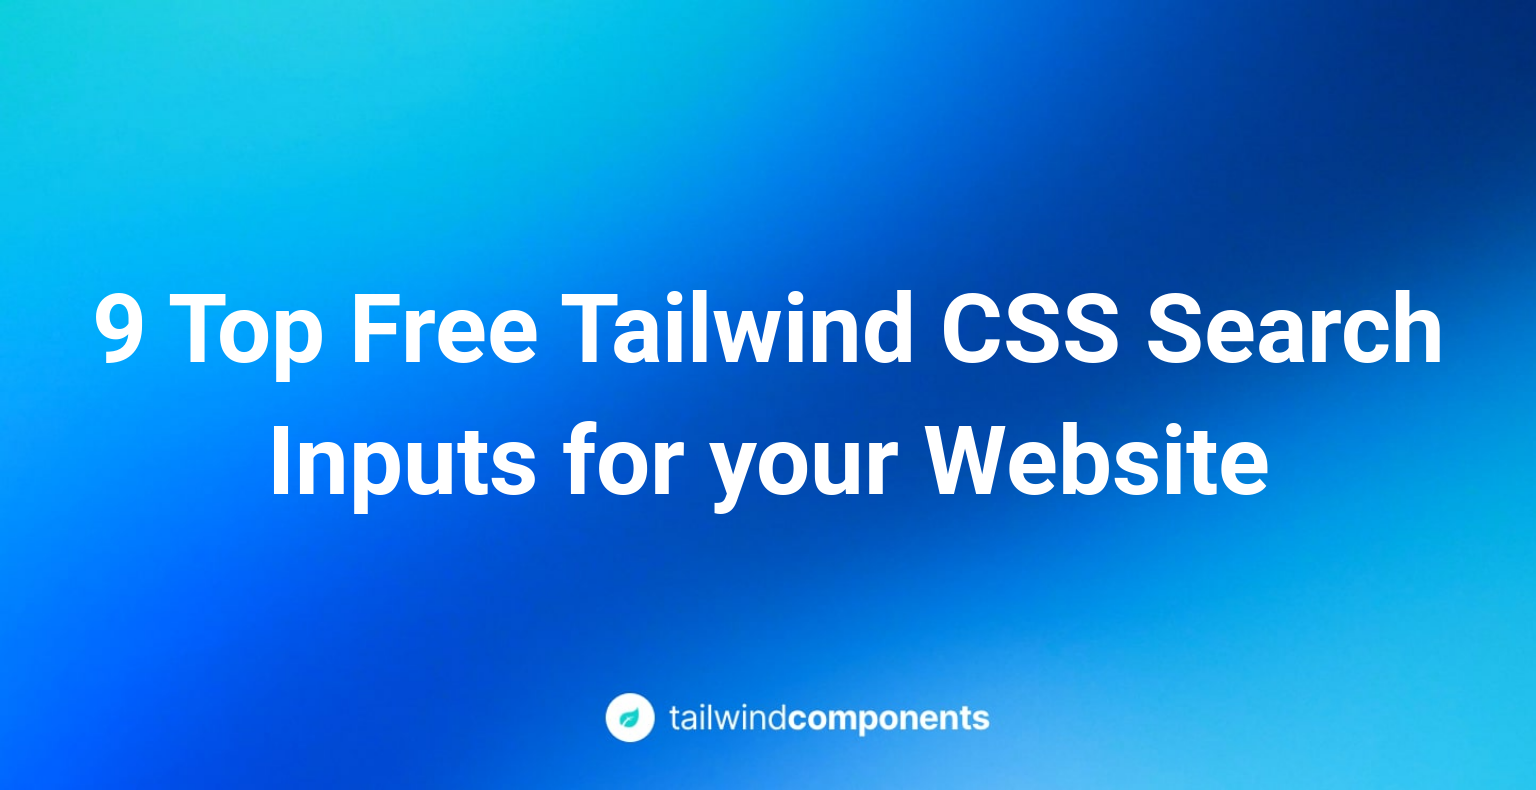 9 Top Free Tailwind CSS Search Inputs for your Website Image